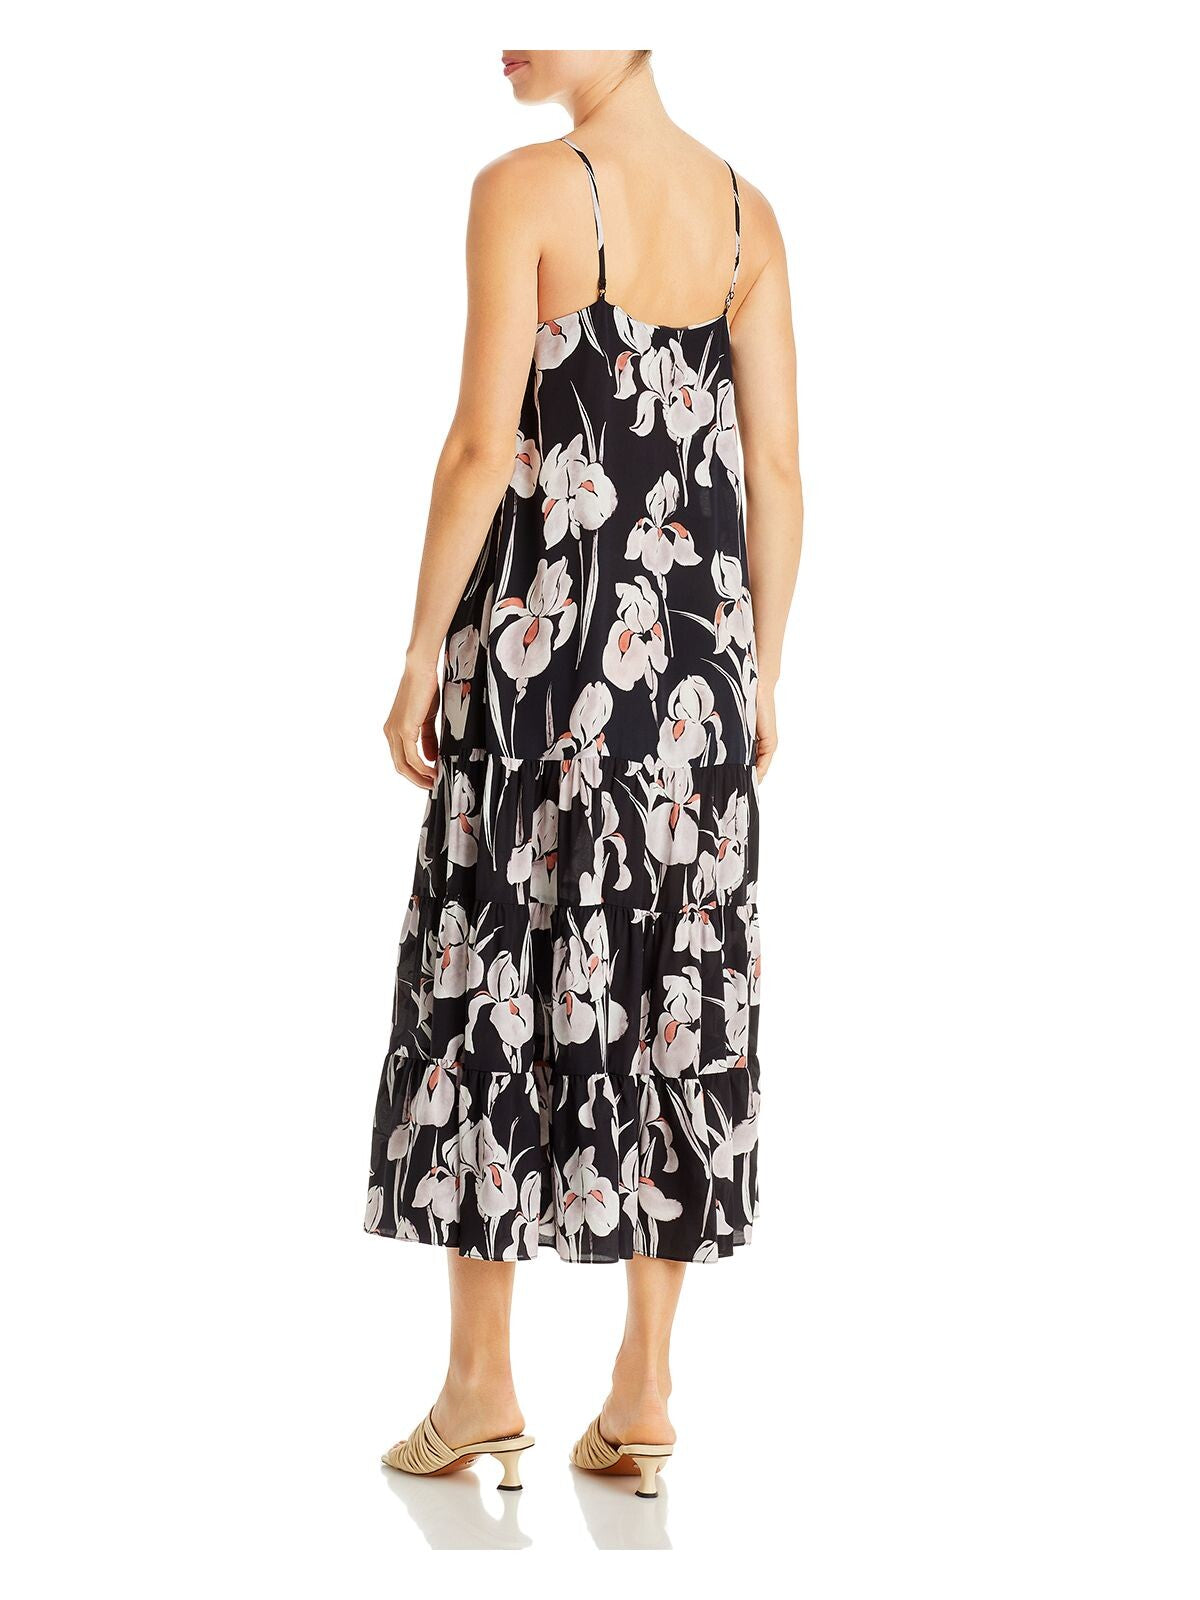 JASON WU Womens Black Adjustable Button Up Unlined Tiered Floral Spaghetti Strap V Neck Midi Fit + Flare Dress 8